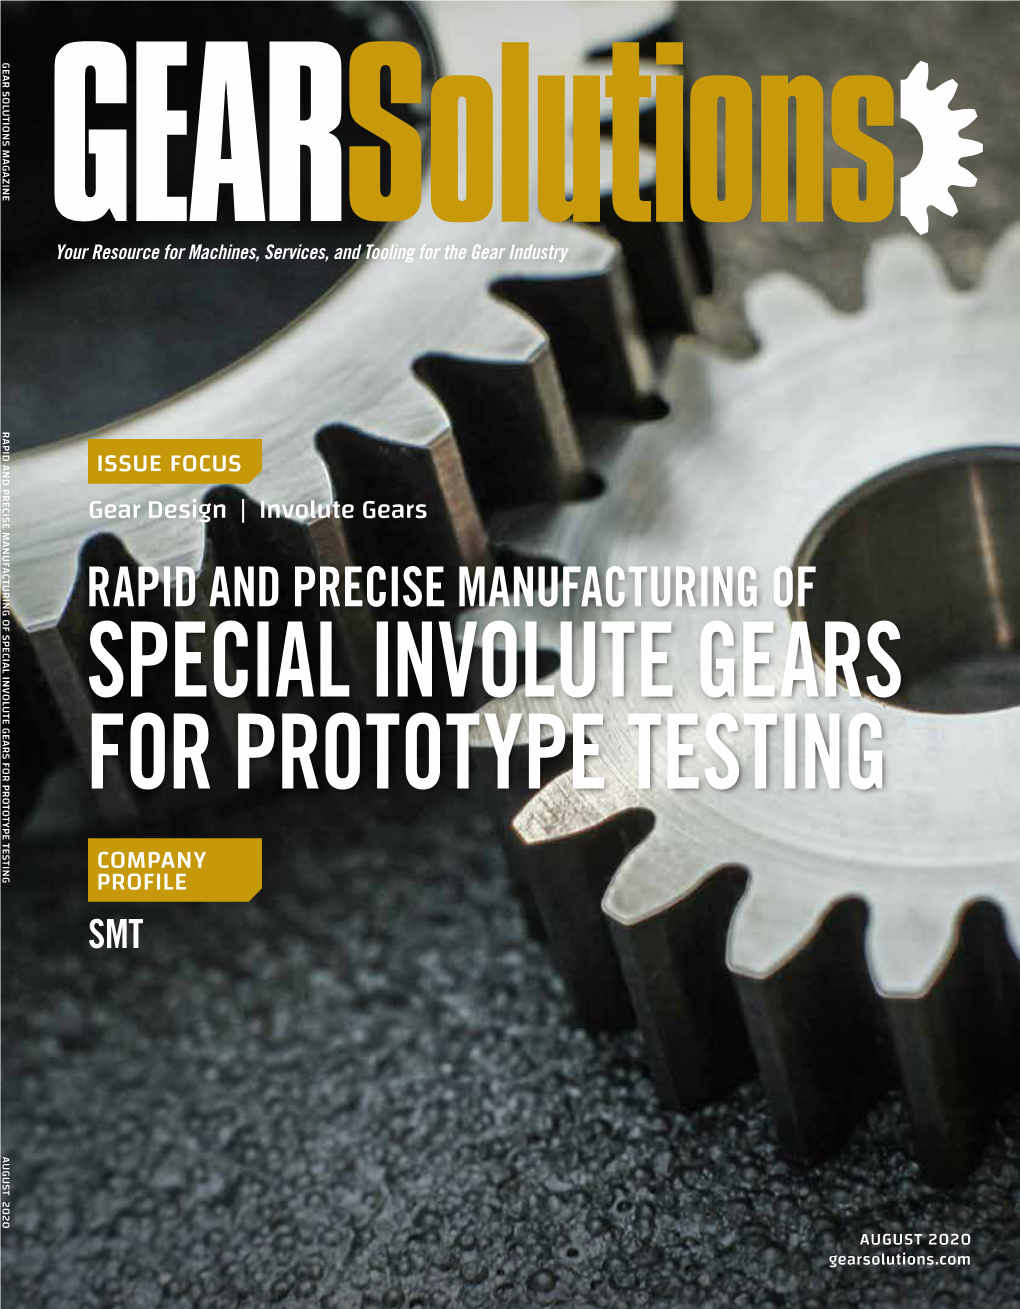 Special Involute Gears for Prototype Testing